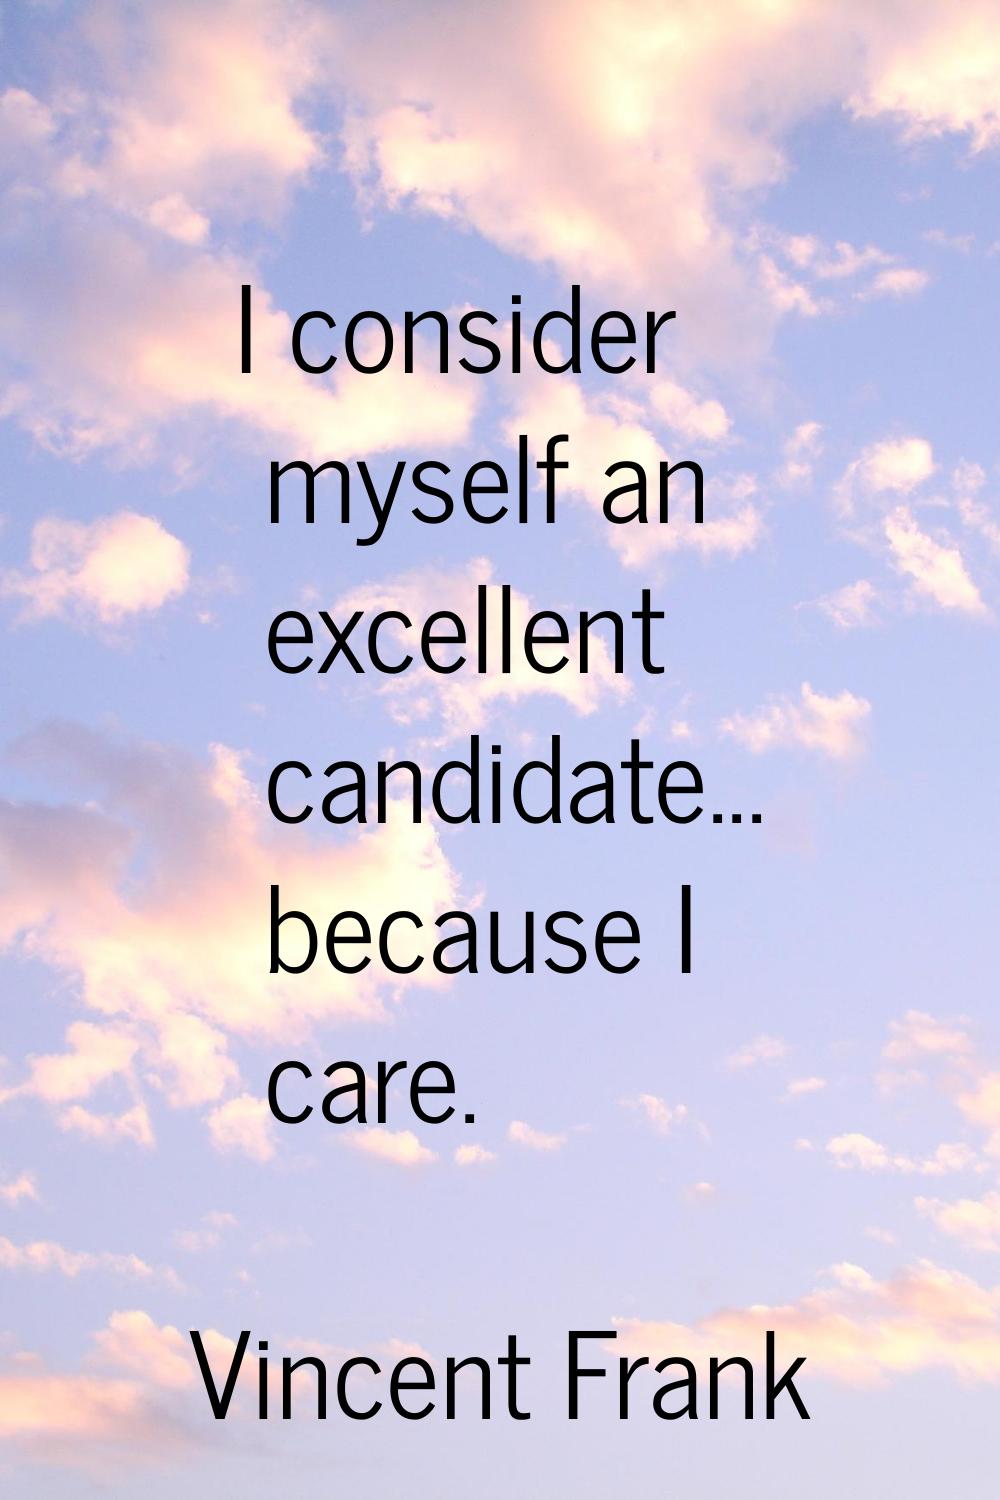 I consider myself an excellent candidate... because I care.